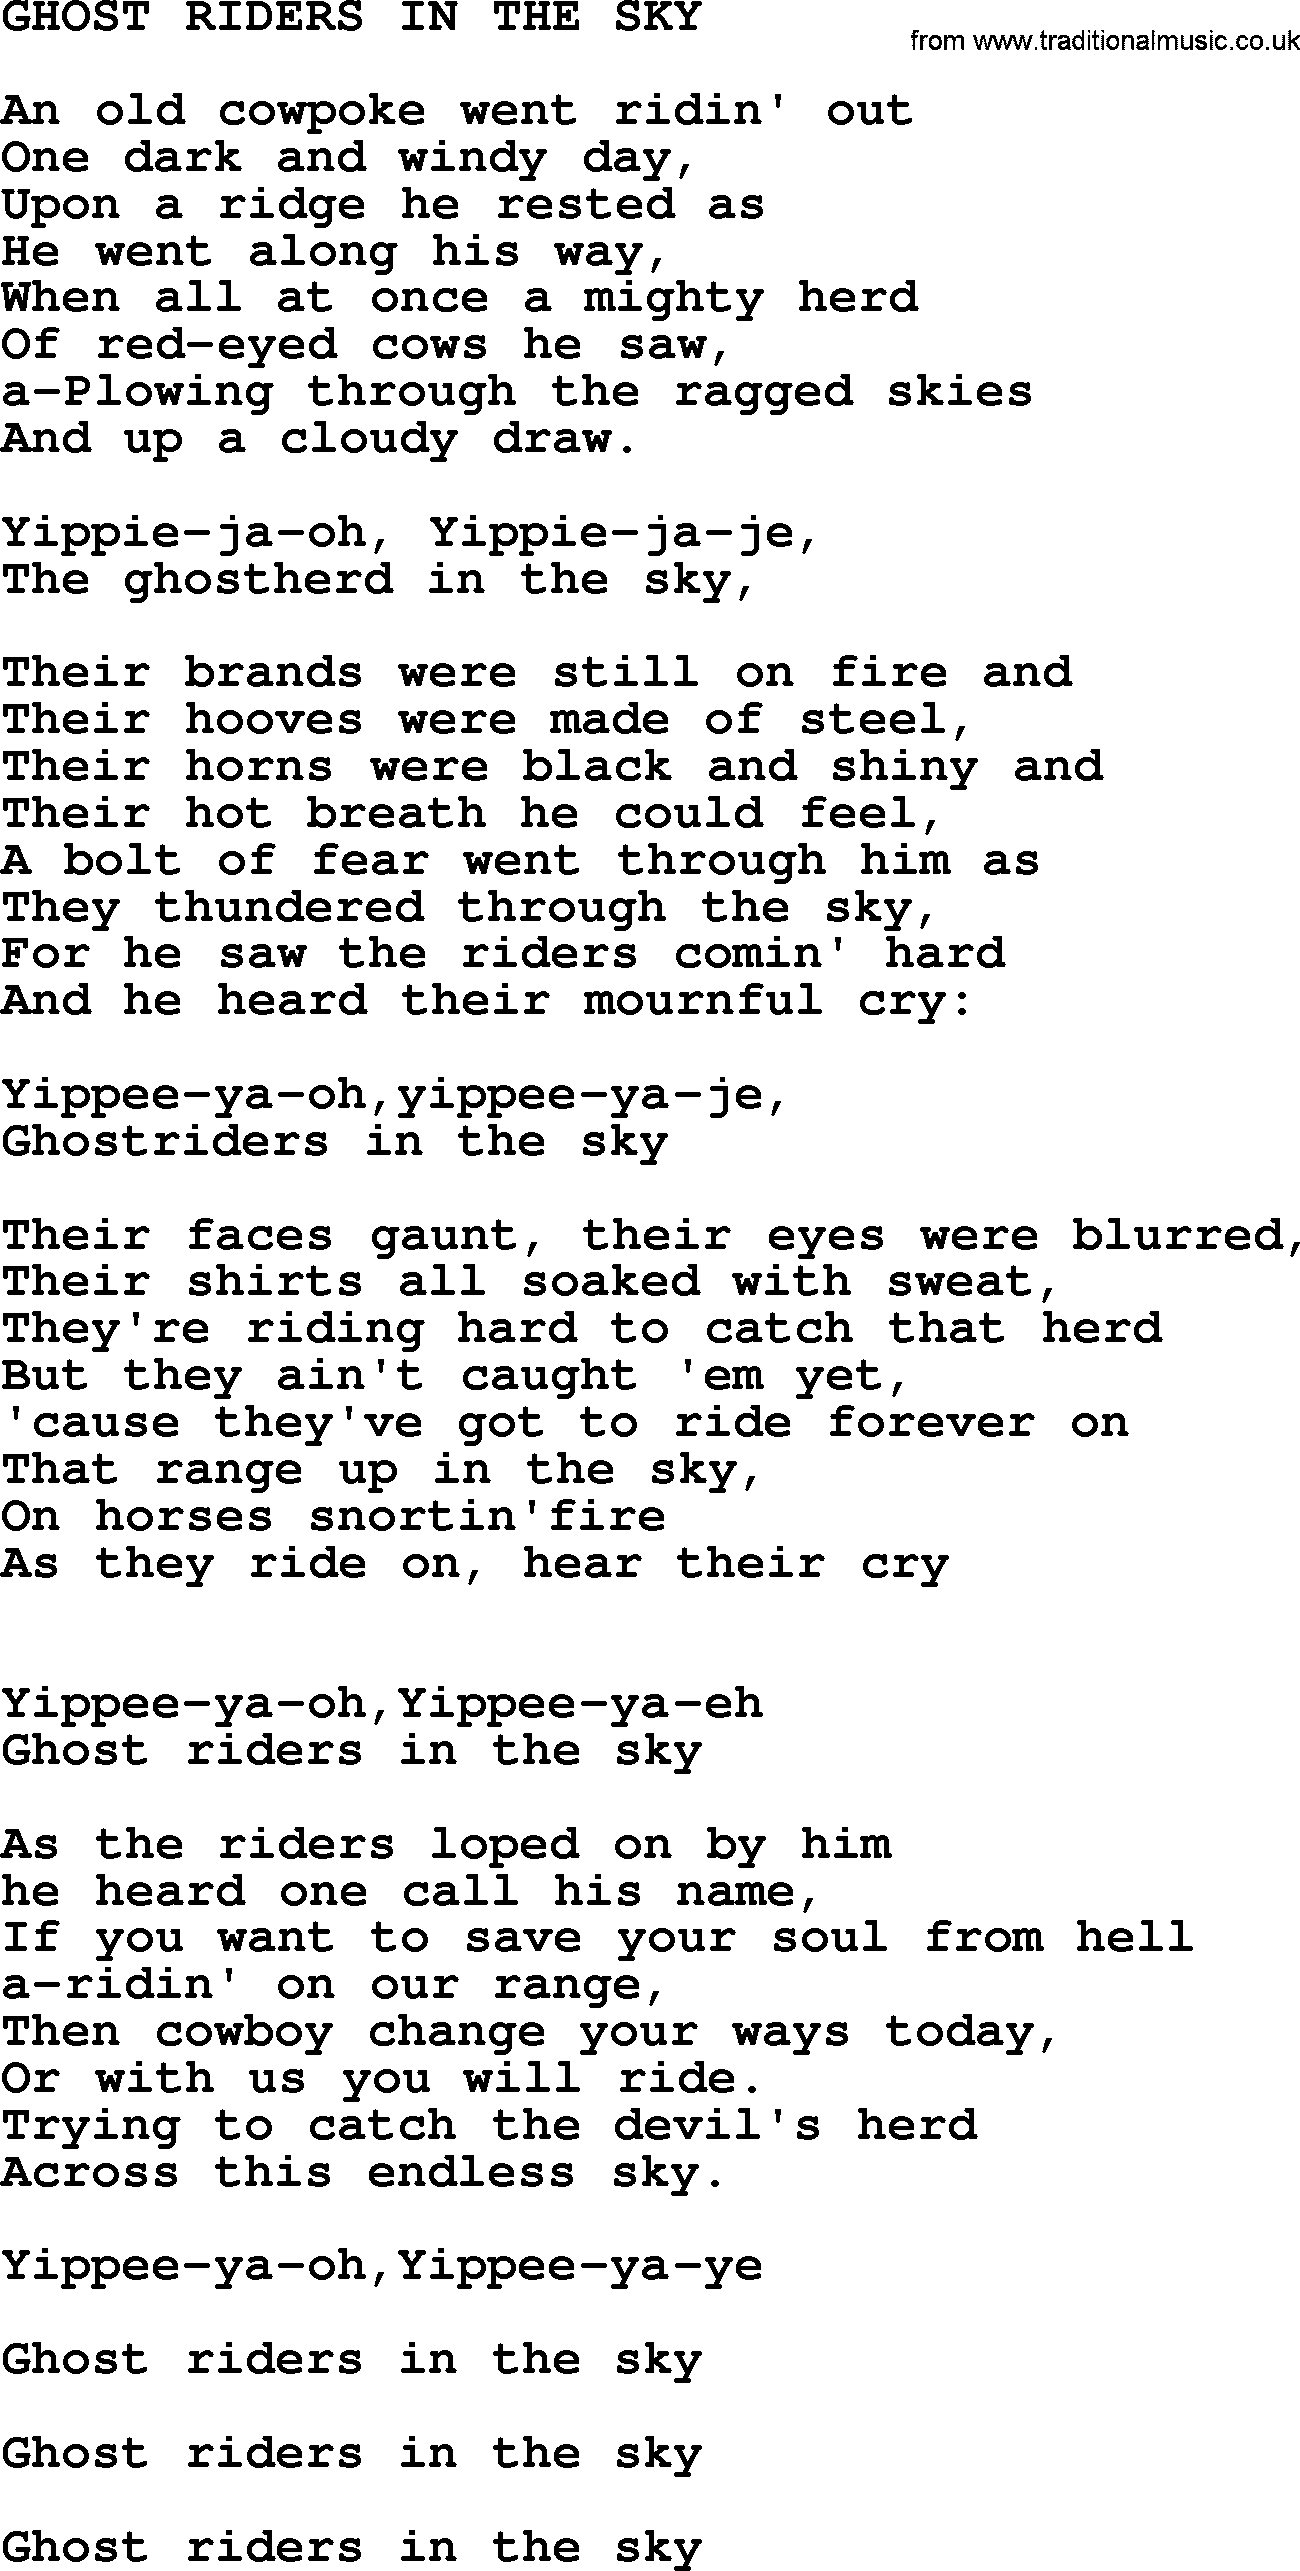 Johnny Cash song Ghost Riders In The Sky.txt lyrics